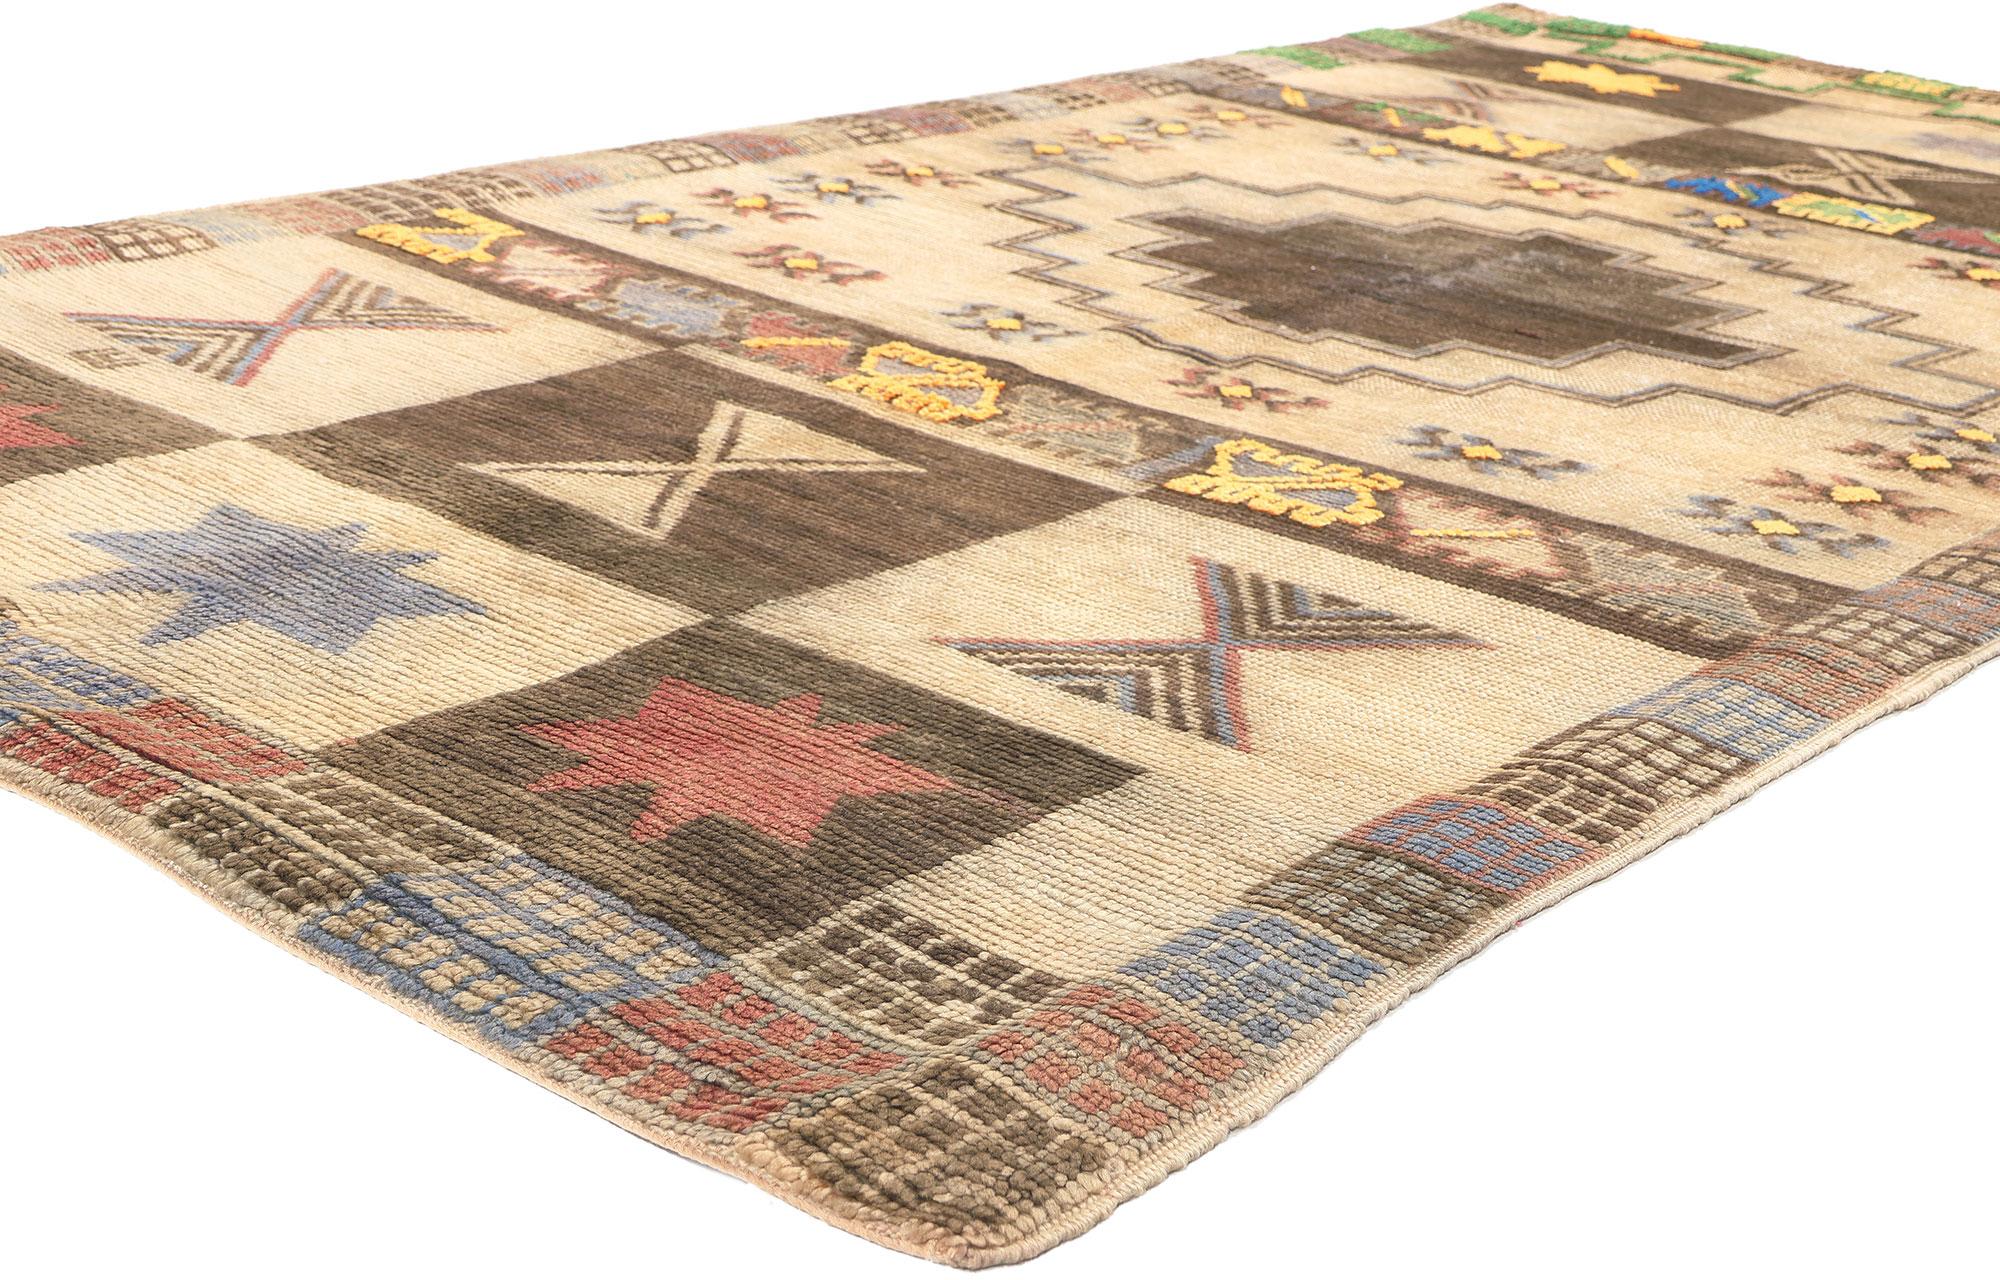 20471 Vintage Taznakht Moroccan Rug, 04'09 x 09'00. 
Witness the enduring allure of this hand-knotted wool vintage Taznakht Moroccan rug— a carpet woven with distinctive styles, creating mesmerizing geometric designs that echo the rich cultural